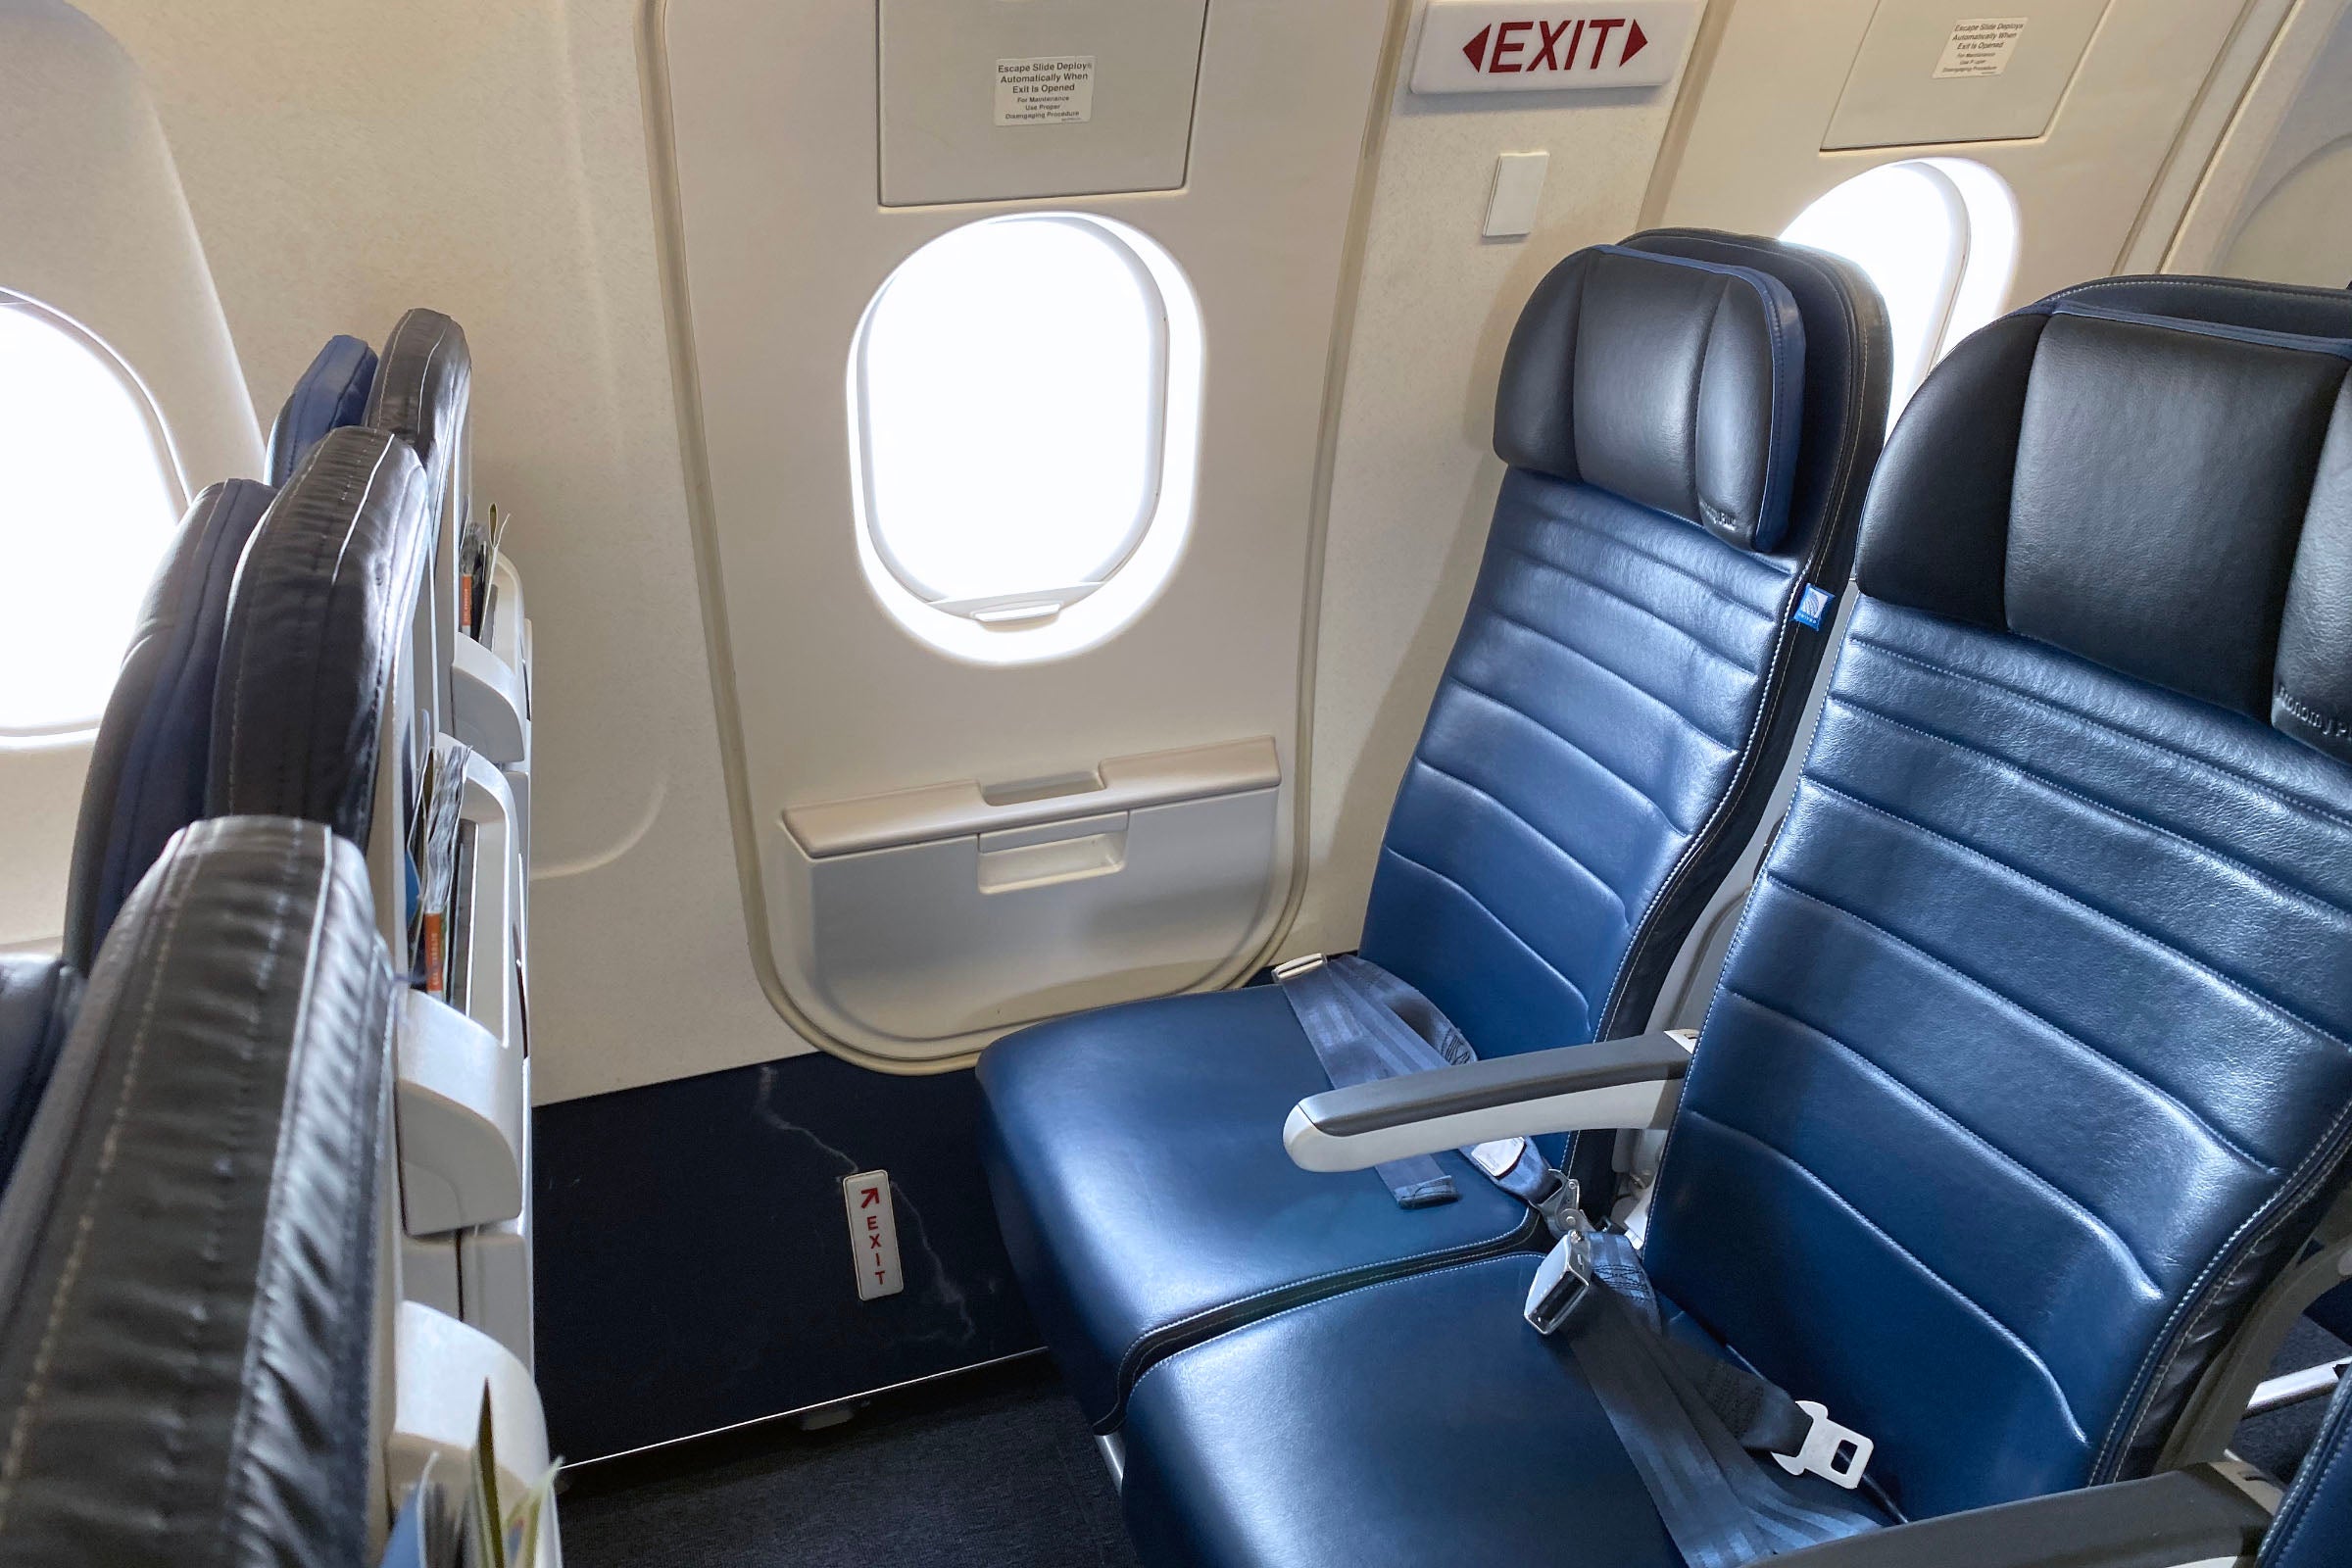 united airlines seat row